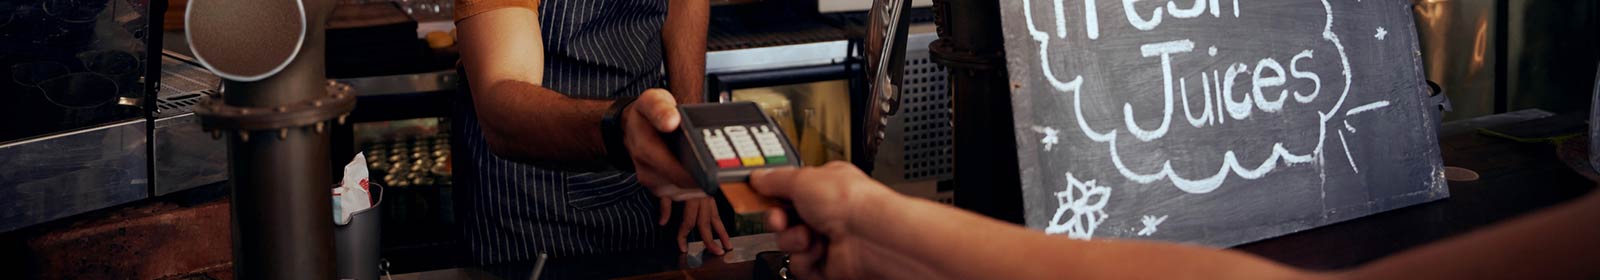 a person making a card payment